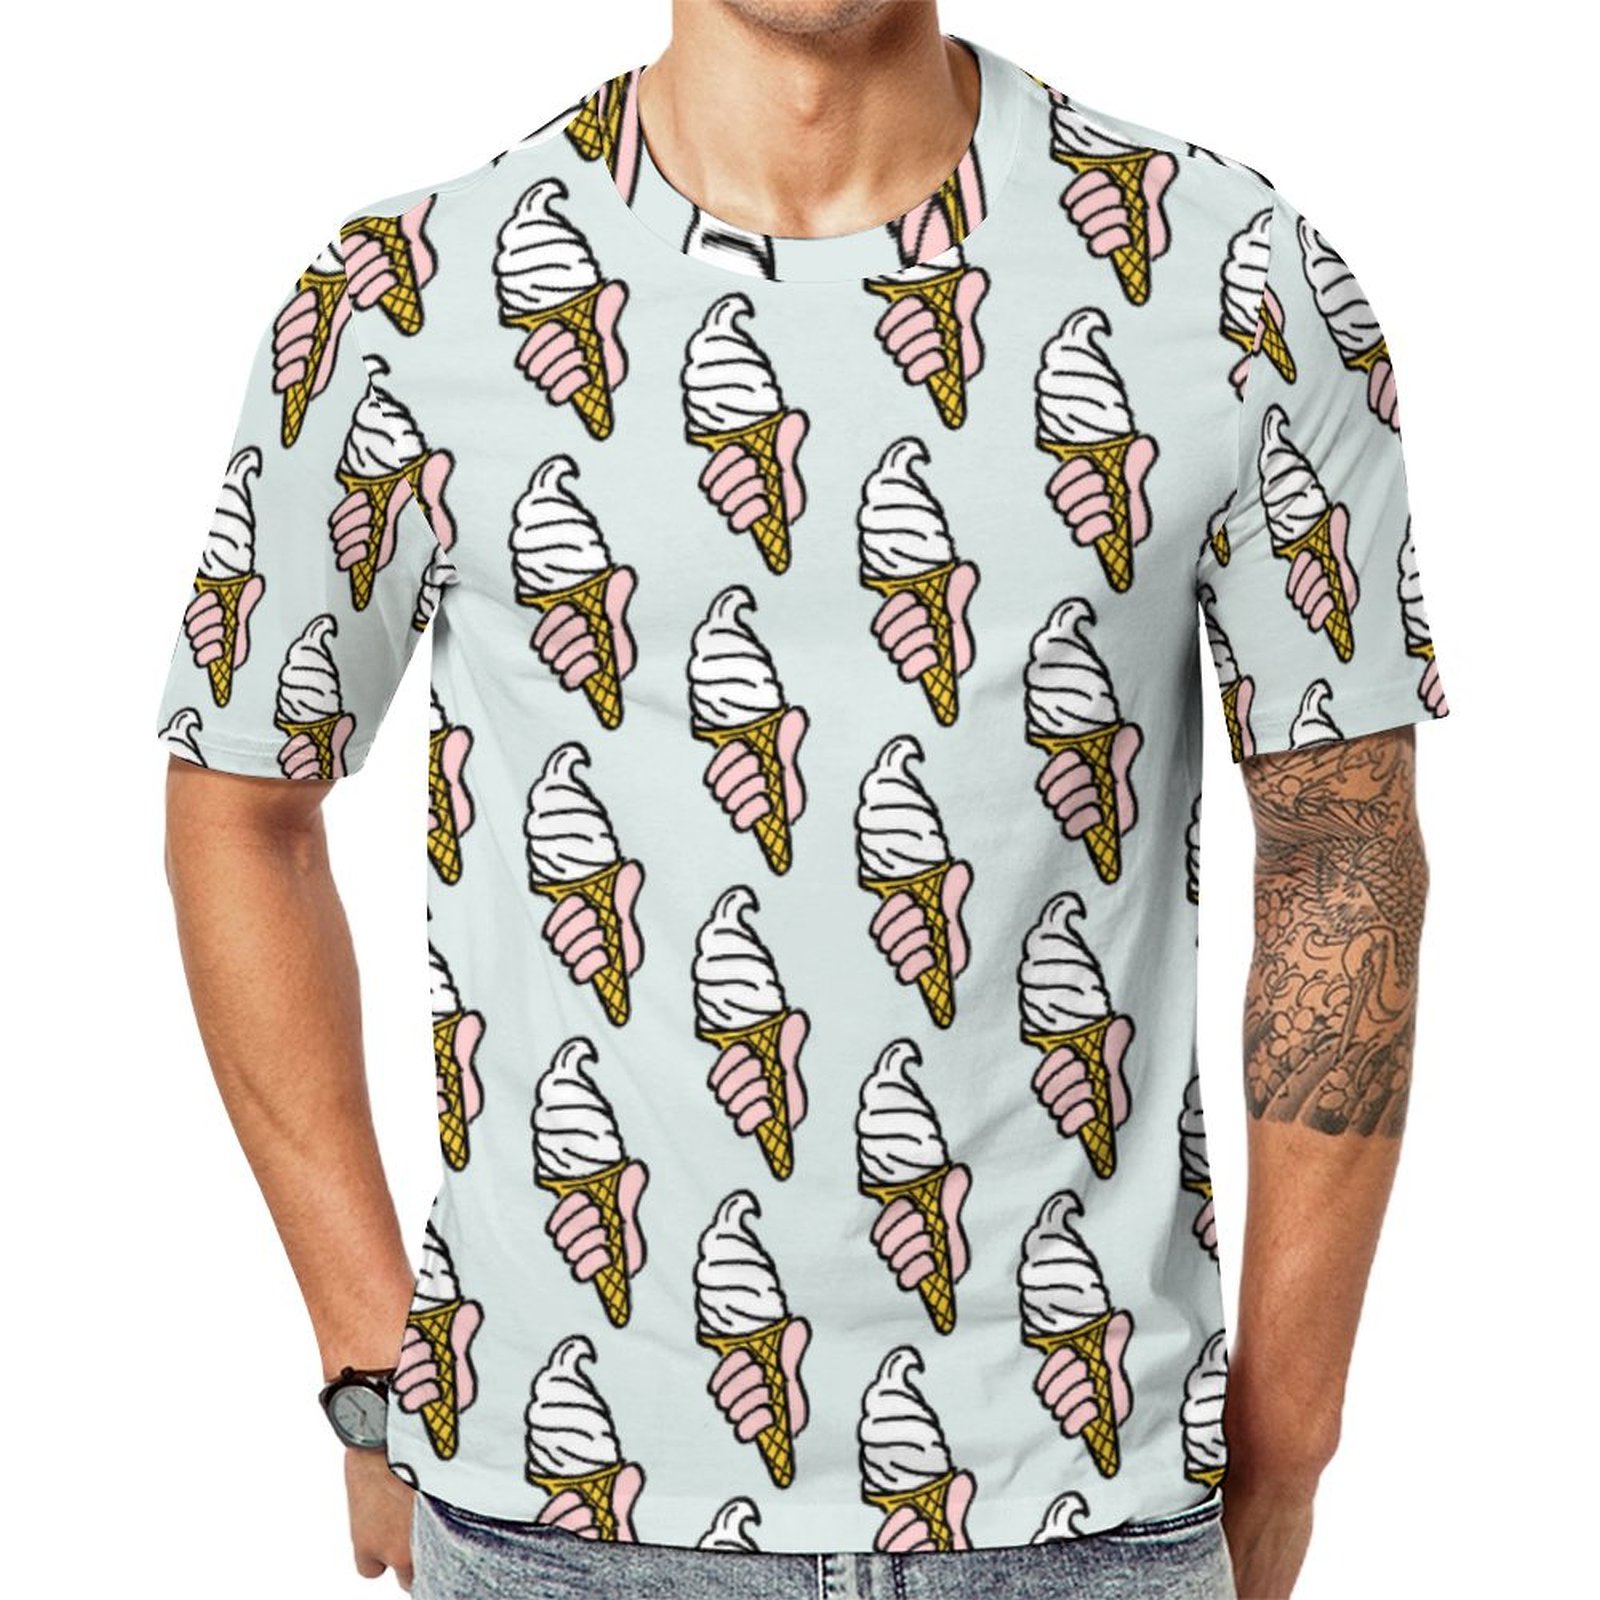 Ice Cream Illustration All Over Short Sleeve Print Unisex Tshirt Summer Casual Tees for Men and Women Coolcoshirts